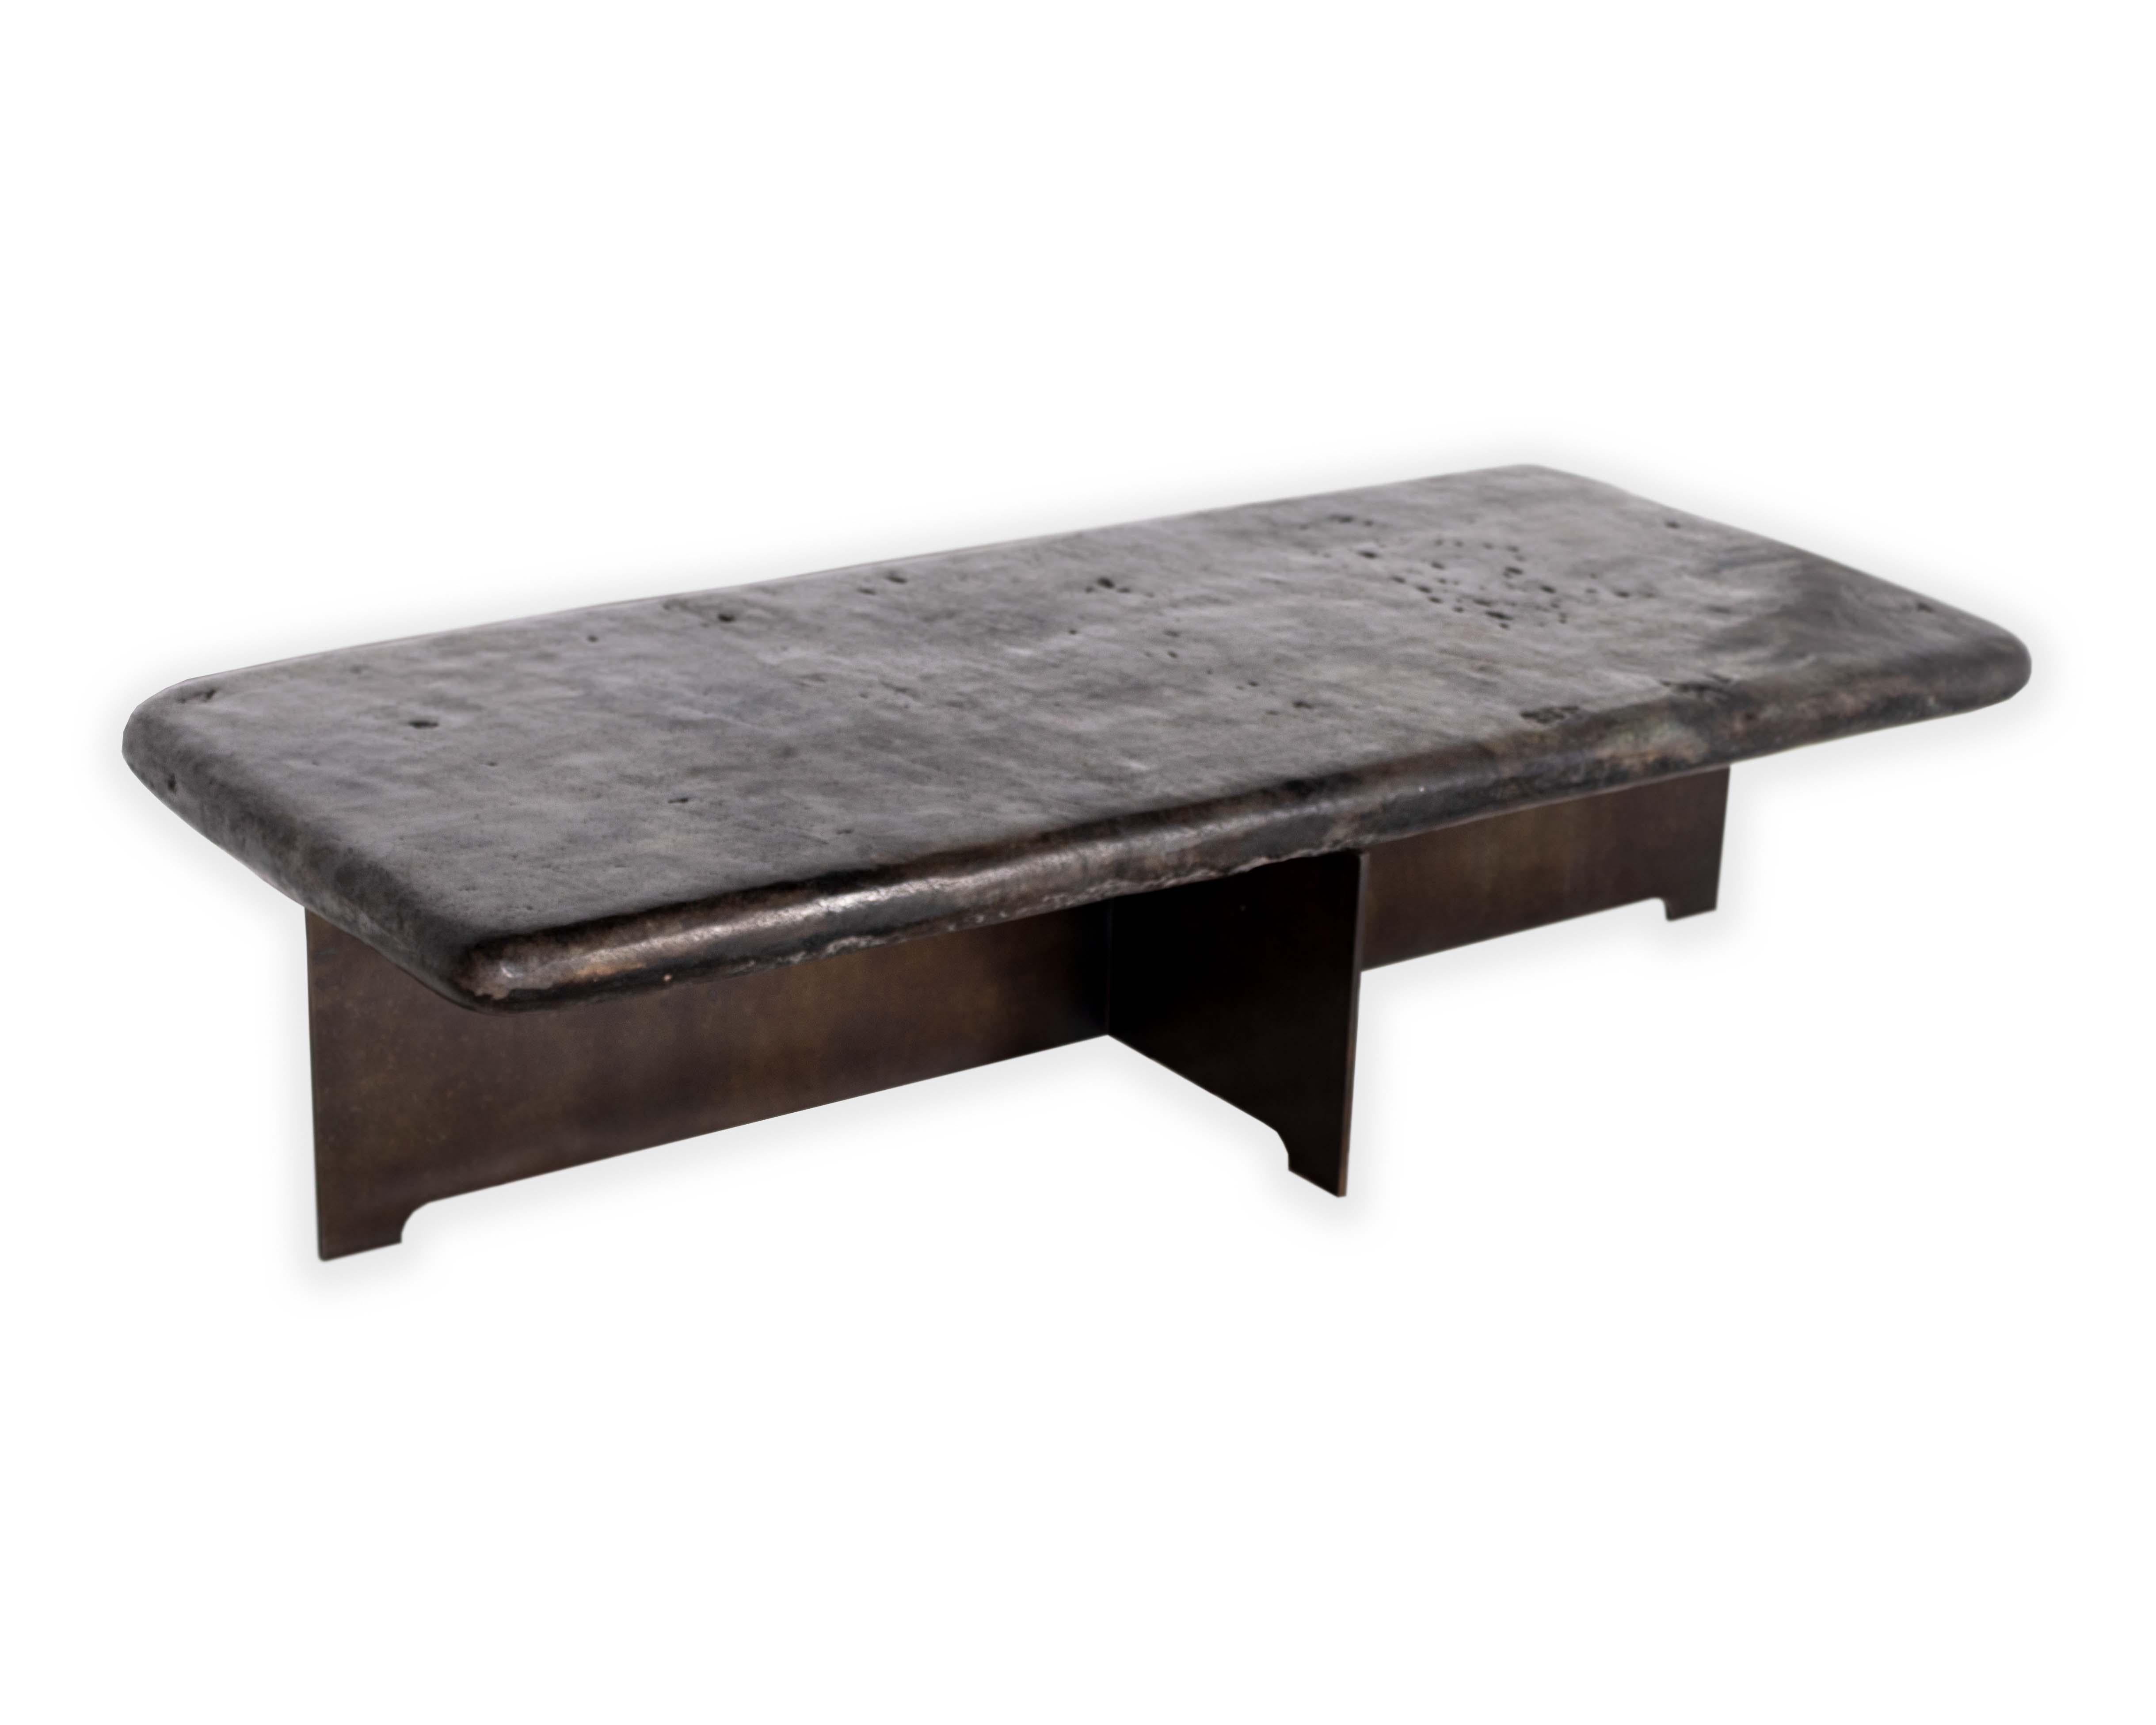 Ebonized Balinese Hand Wrought River Stone Coffee Table on Steel Mount